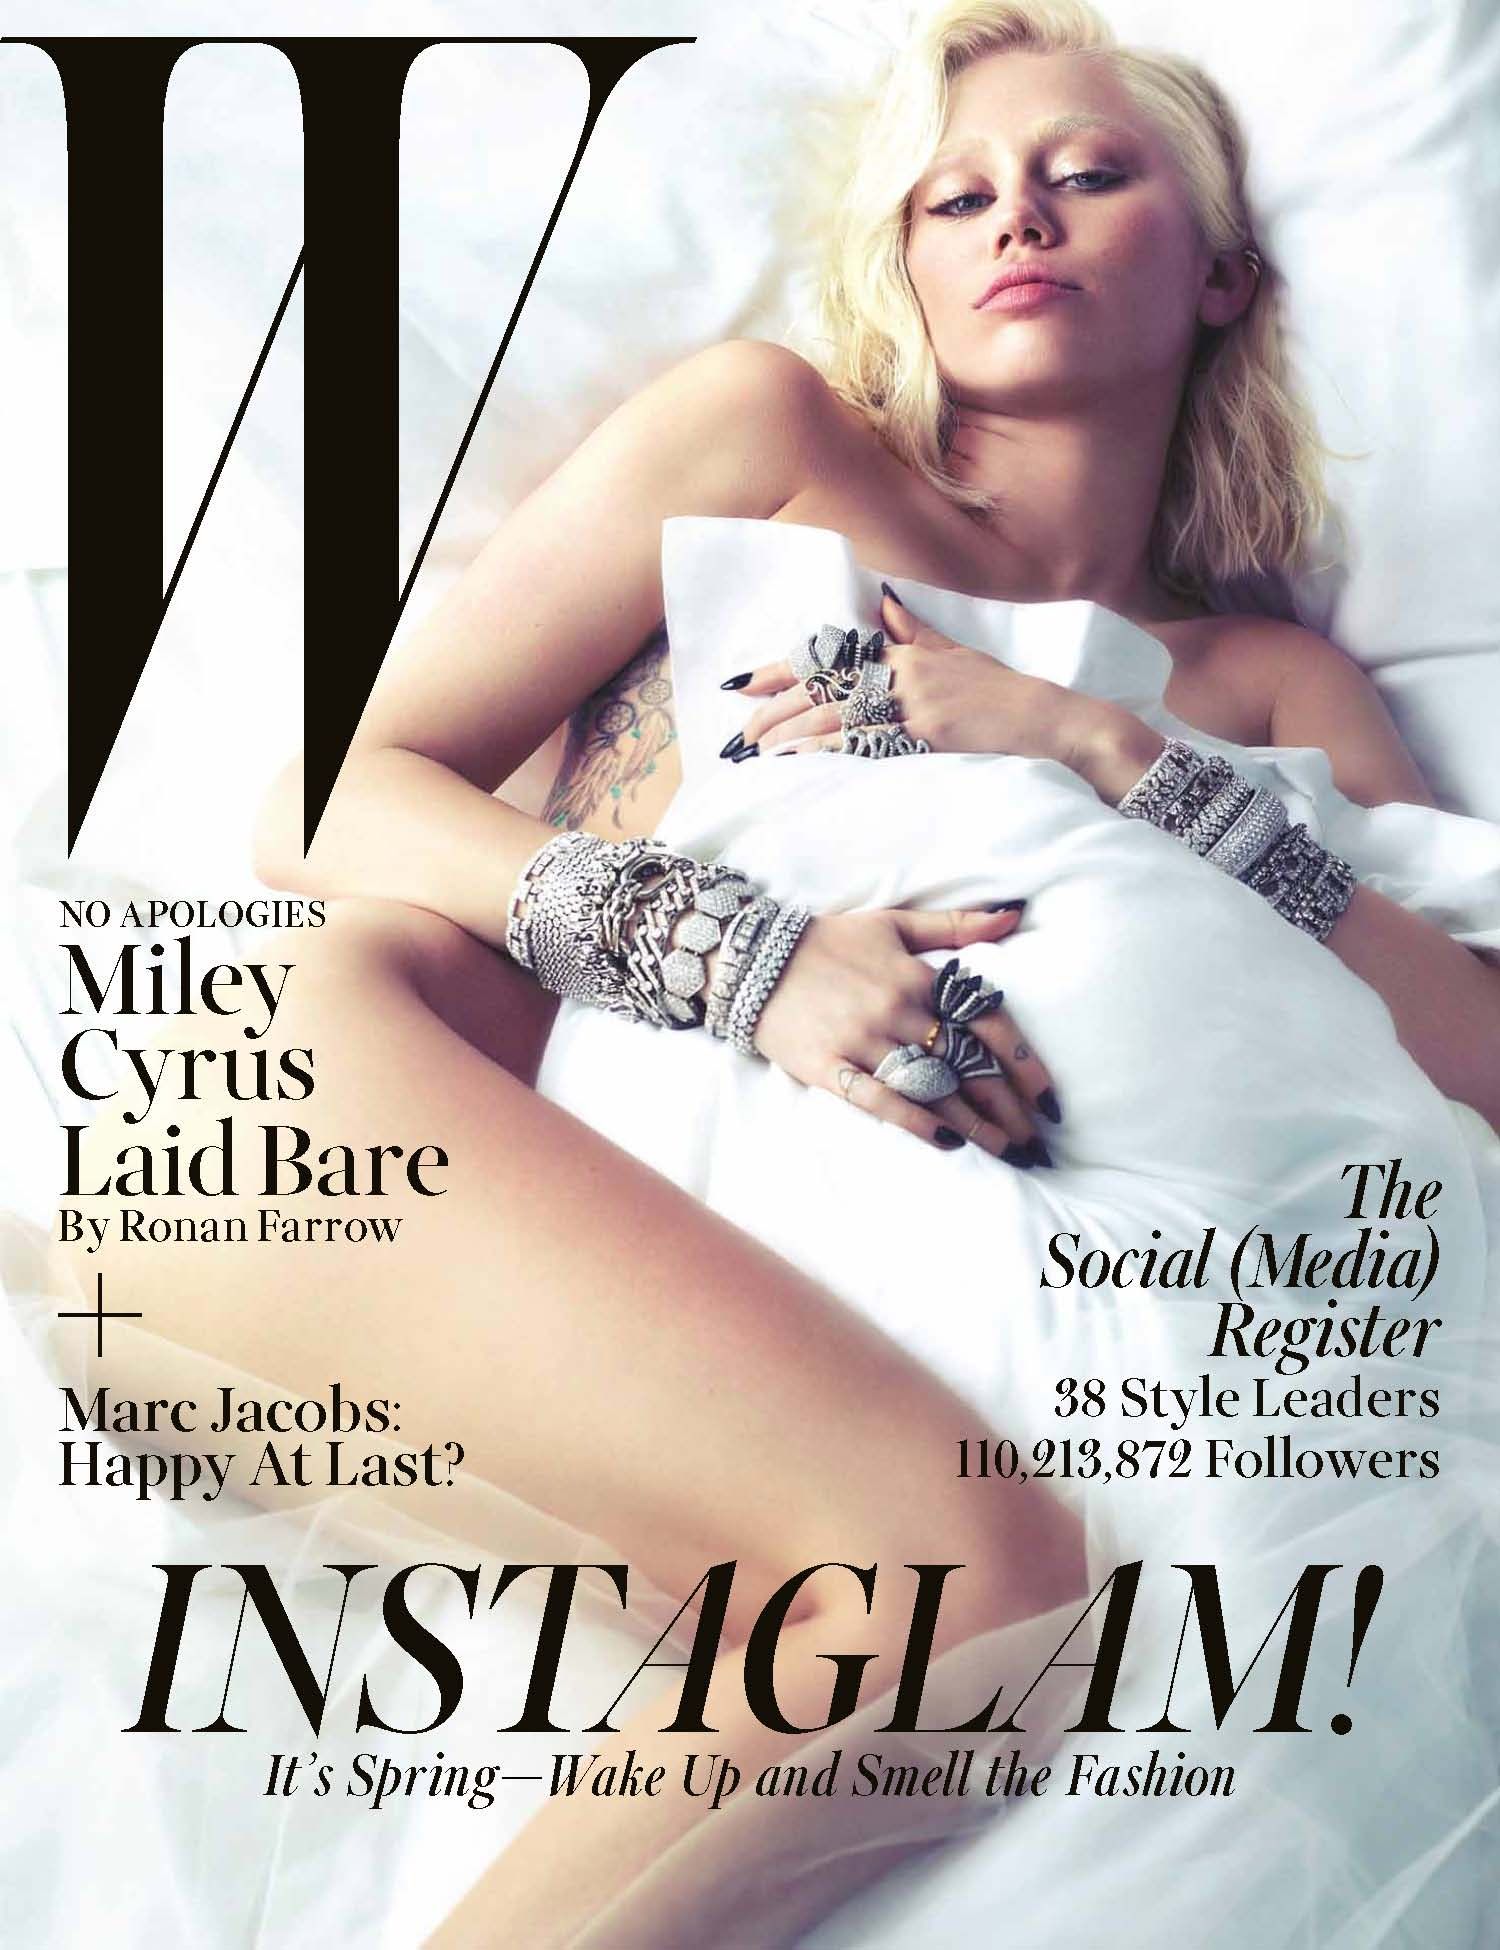 Miley Cyrus Tit Sex - Miley Cyrus poses nude for W Magazine: 'I want to still do this at 75'